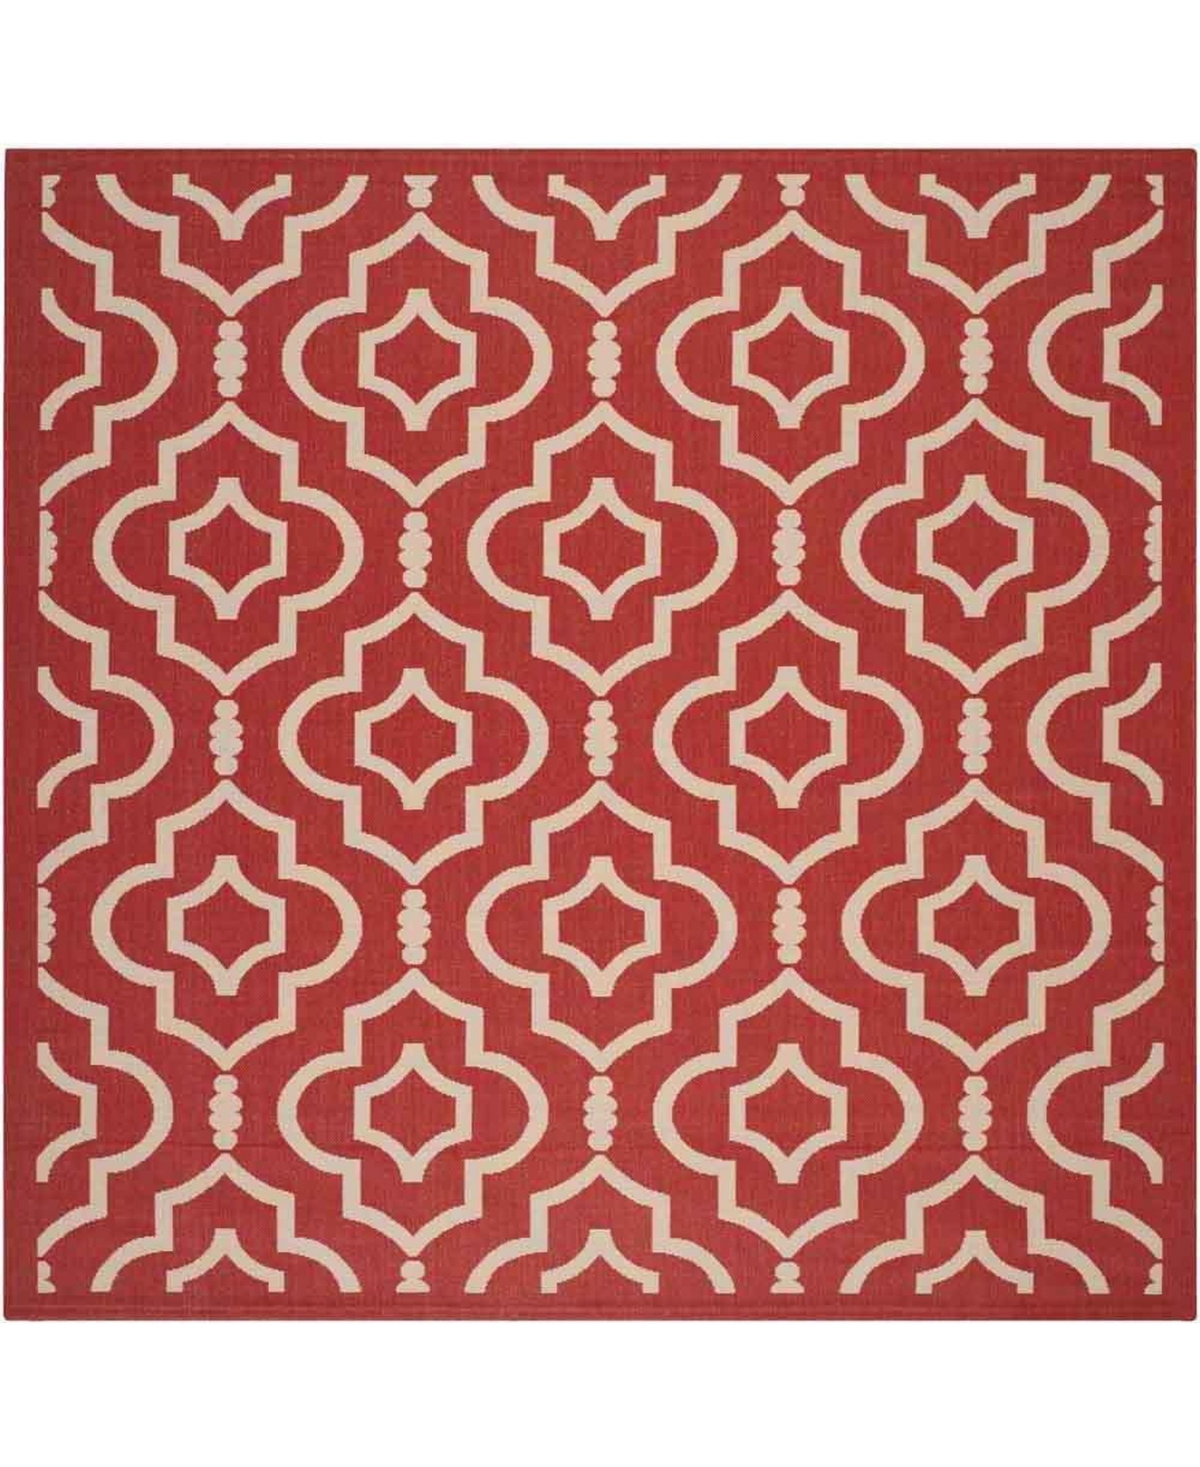 Safavieh Courtyard Cy6926 Red And Bone 7'10" X 7'10" Sisal Weave Square Outdoor Area Rug